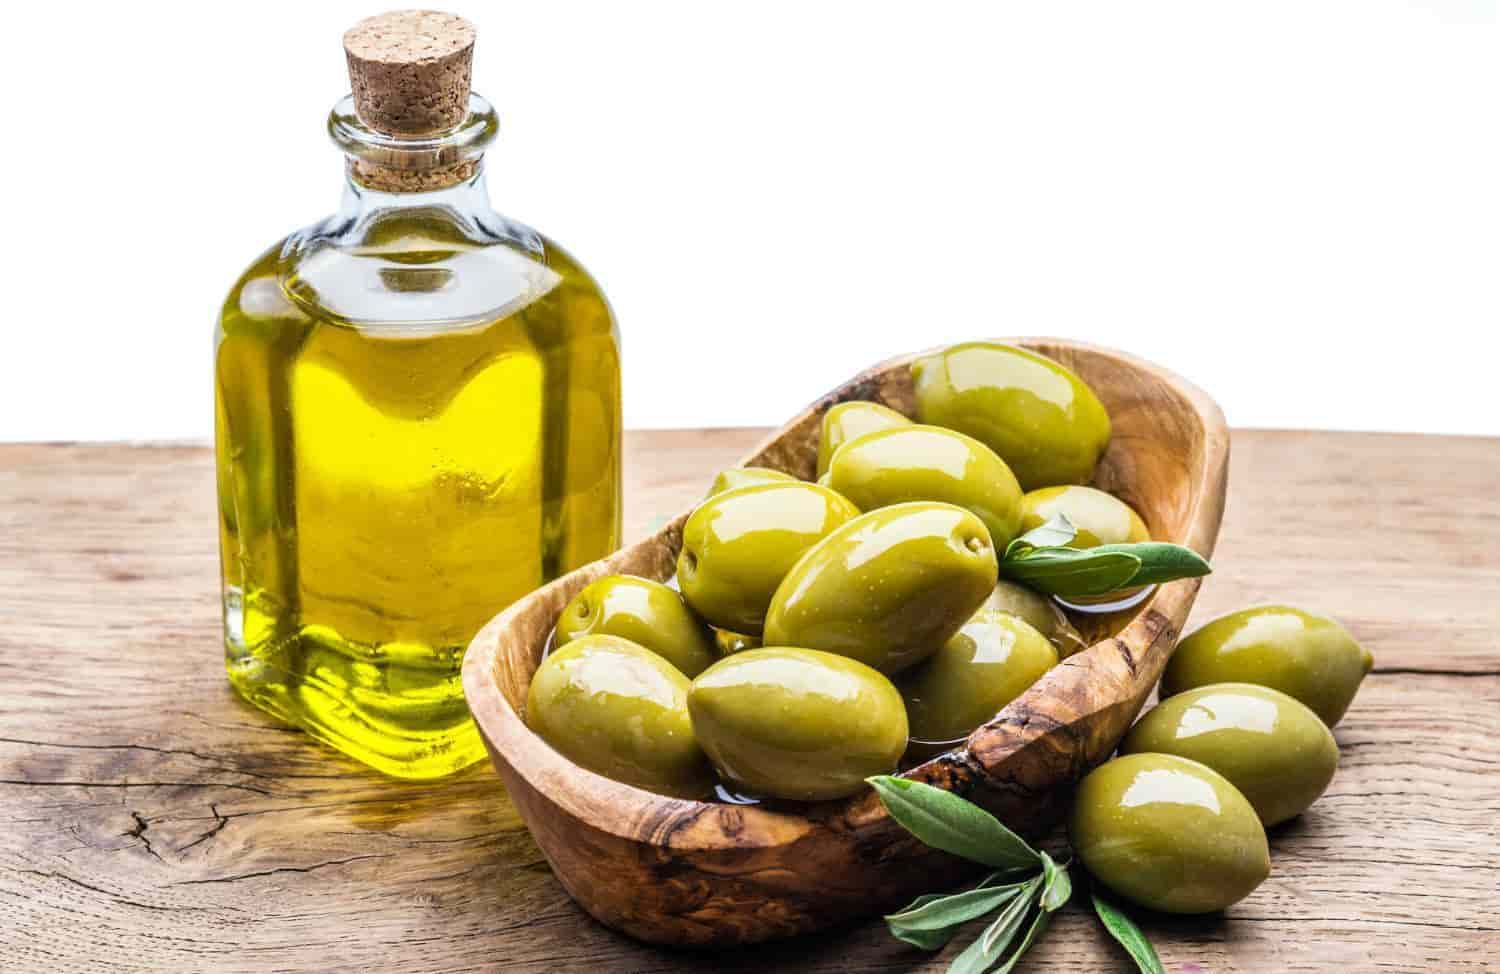 How Extra Virgin Olive Oil is Made